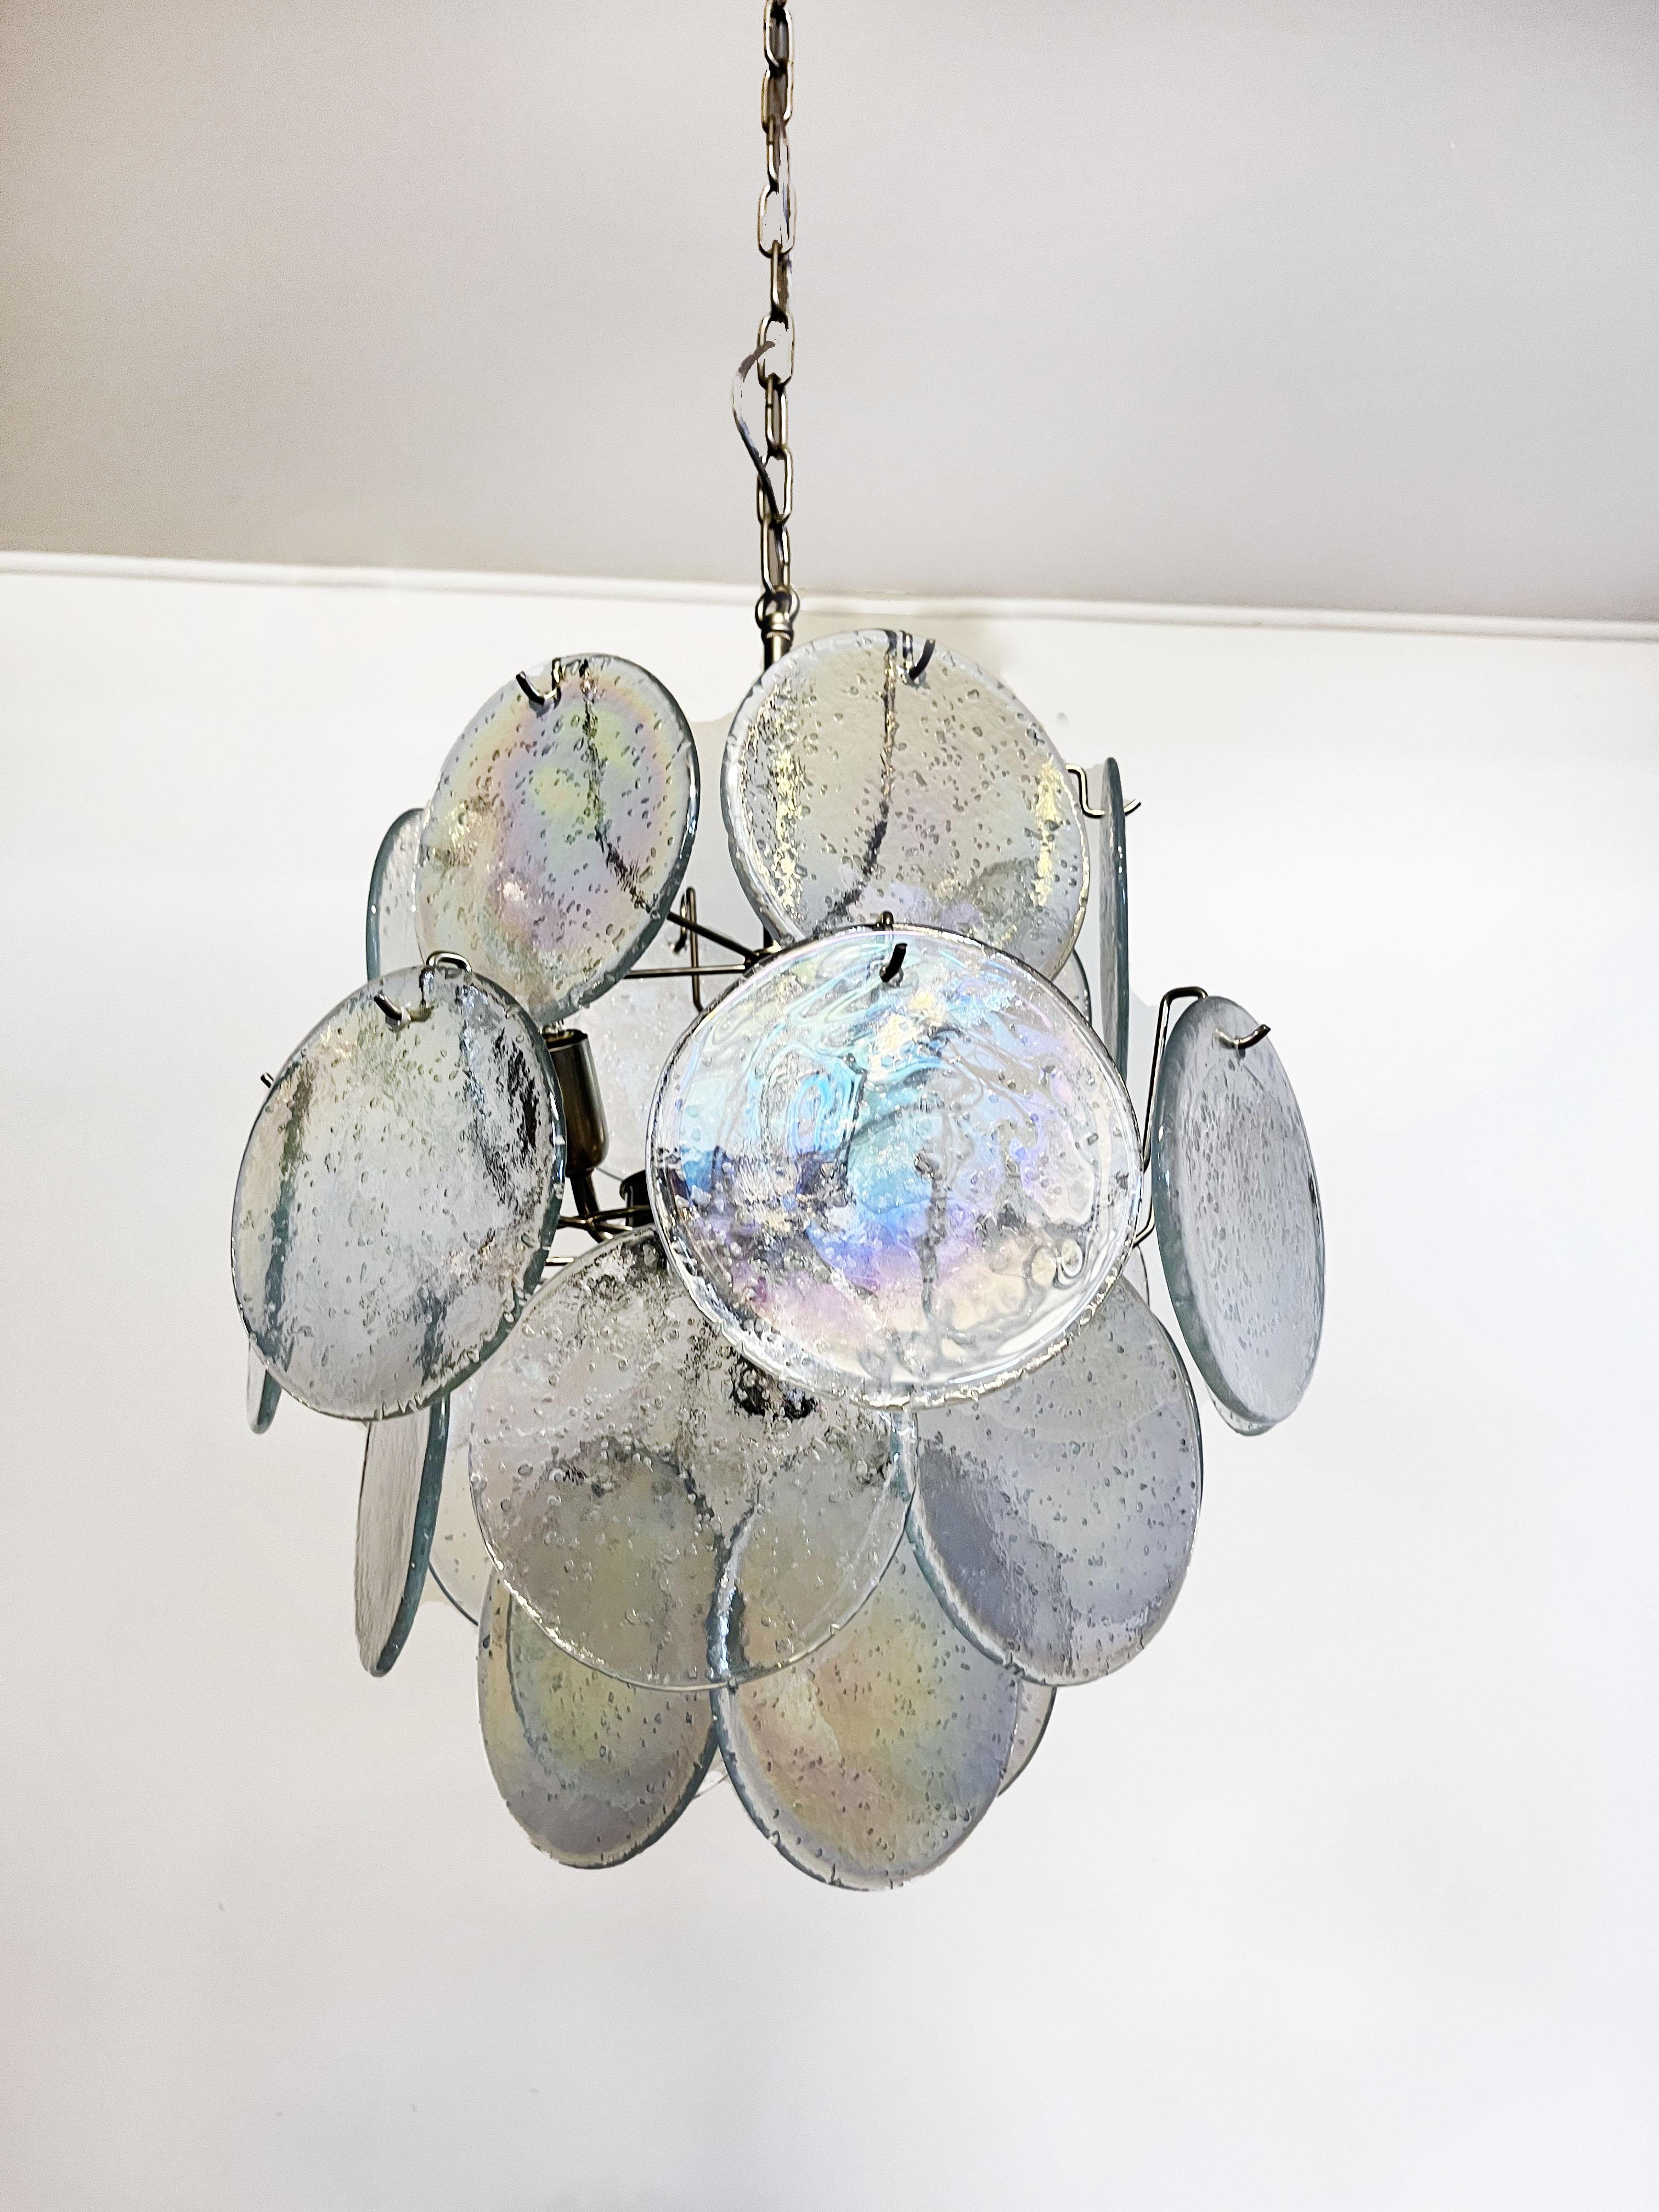 Vintage Italian Murano chandelier in Vistosi style. The chandelier has 24 fantastic iridescent grit discs in a nickel metal frame. The glasses have the particularity of reflecting a multiplicity of colors, which makes the chandelier a true work of